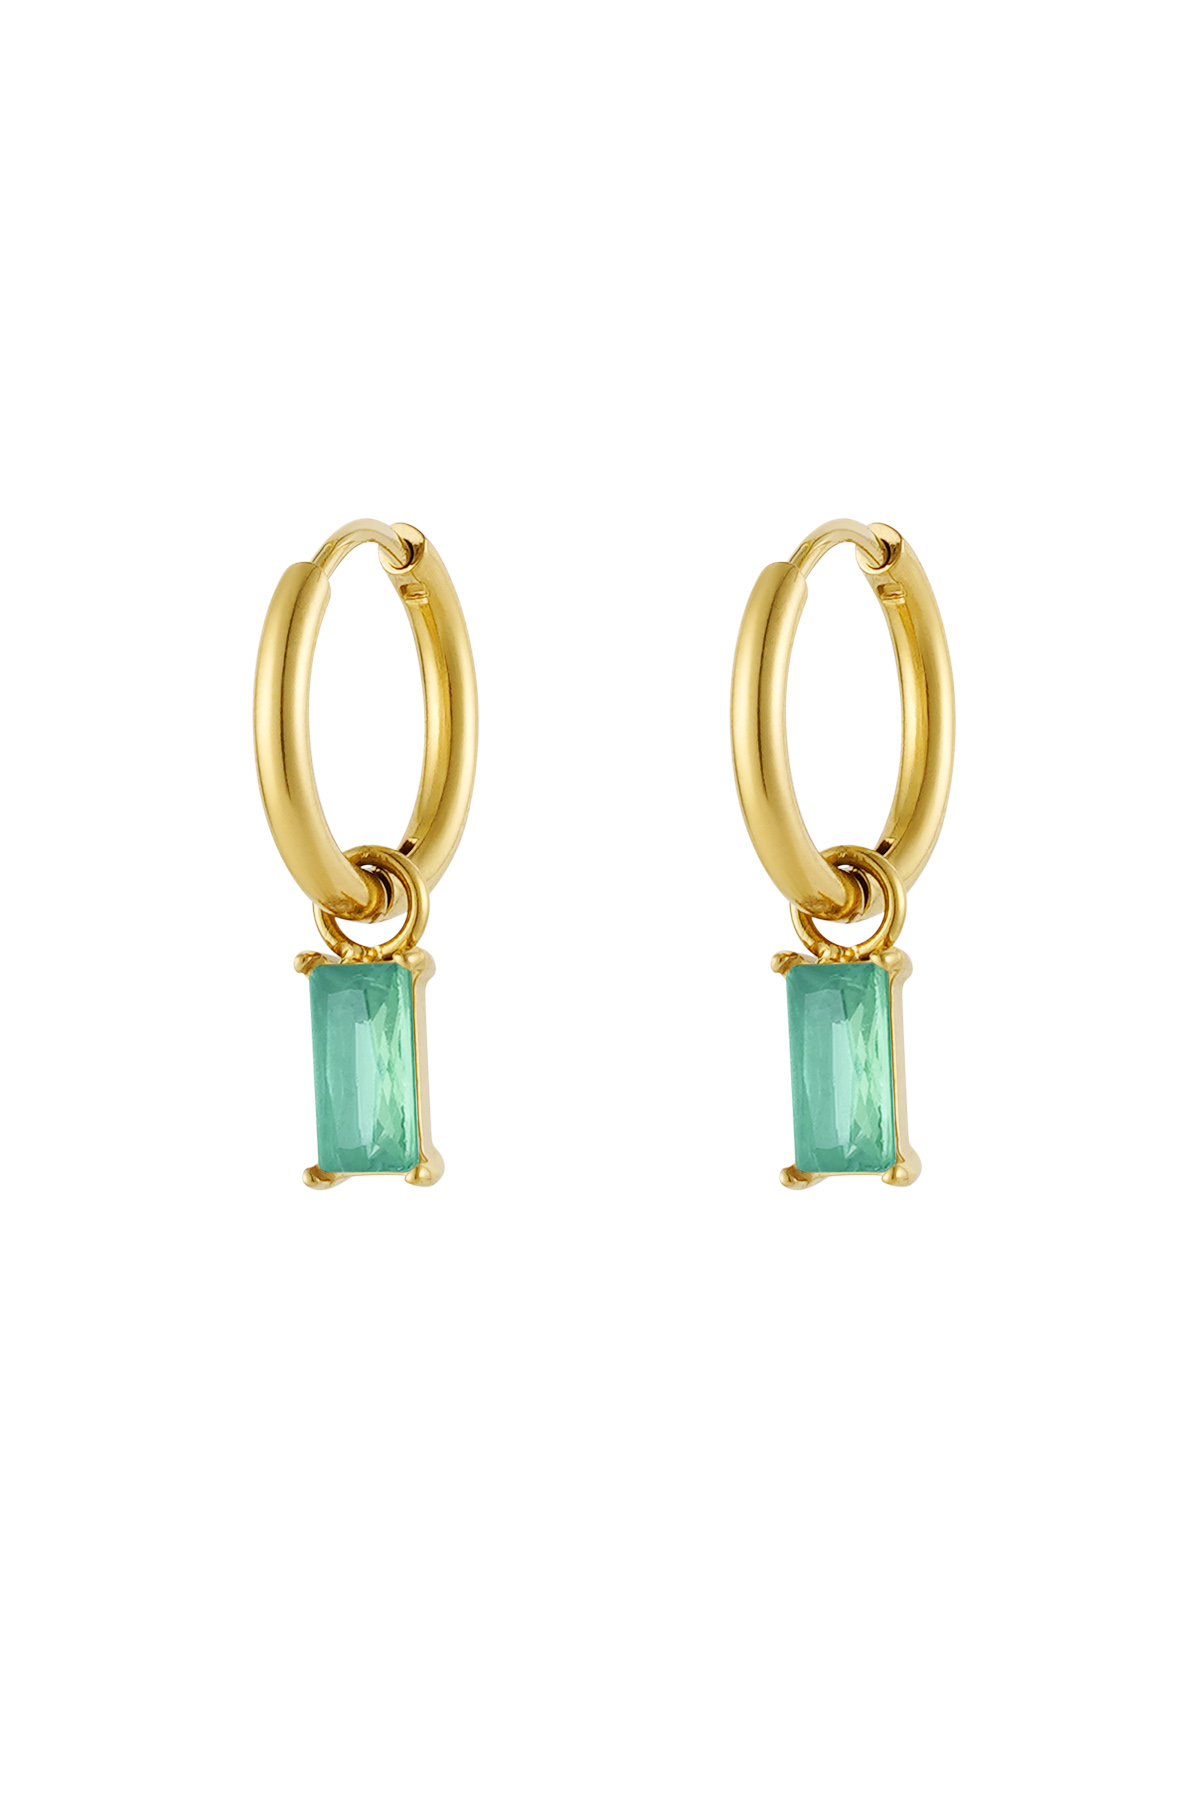 Earrings elongated stone - gold/turquoise h5 